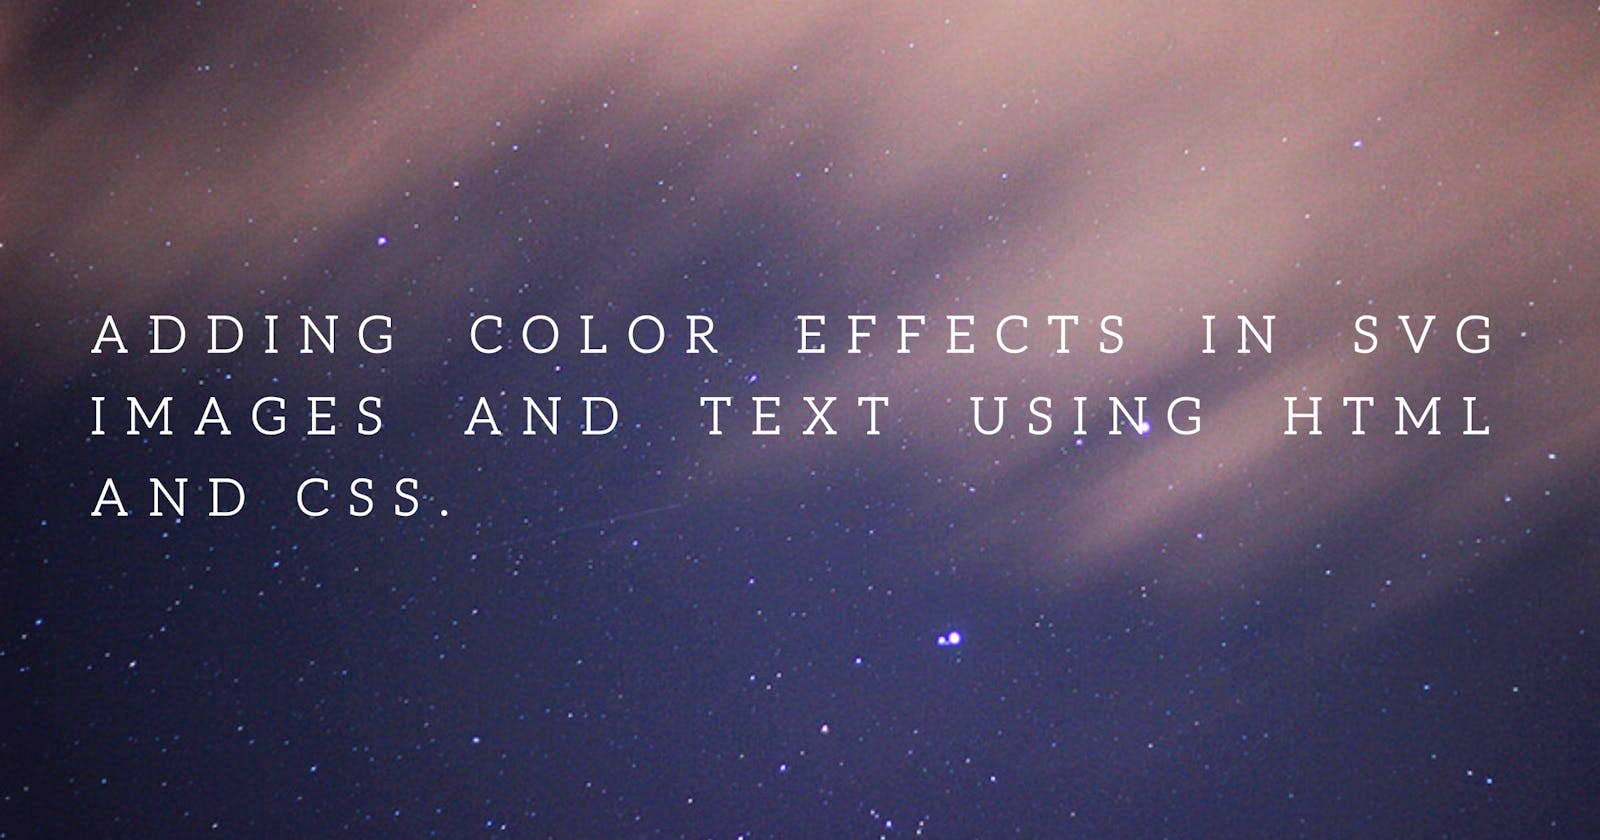 Adding color effects in svg images and text using html and css.